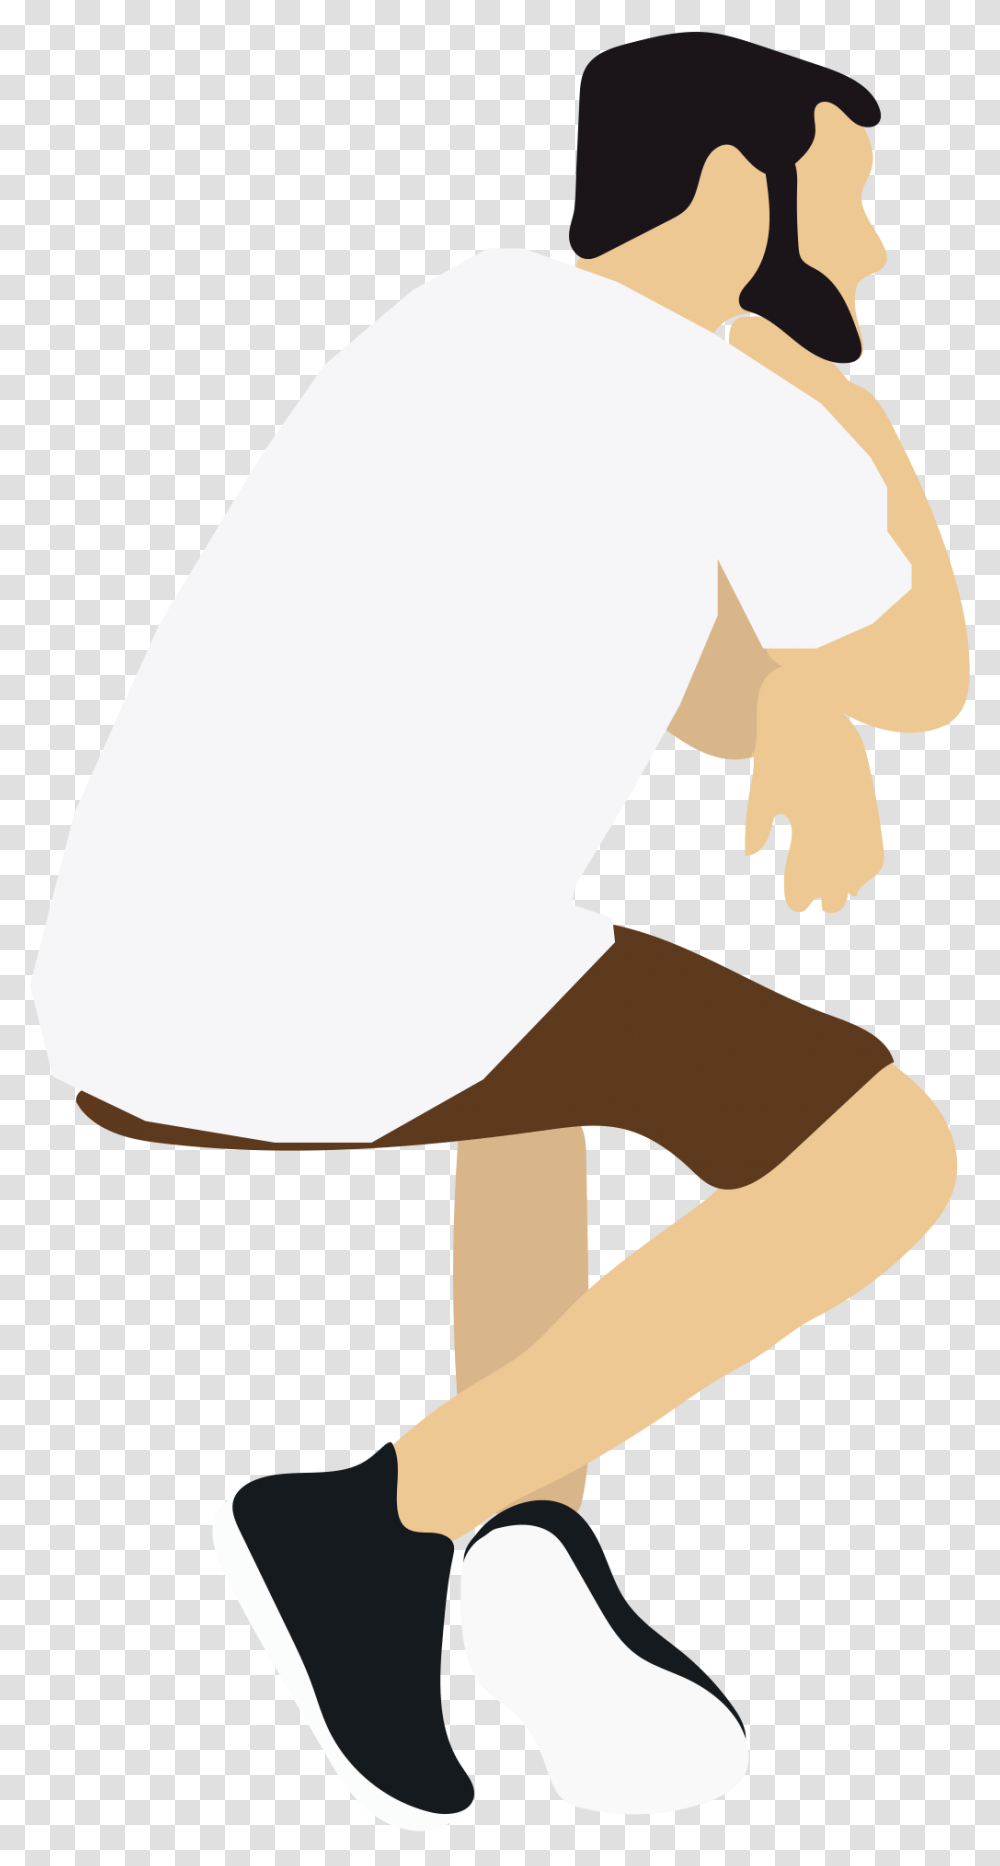 Architecture People Man Sitting Back Cartoon People, Axe, Kneeling, Arm, Outdoors Transparent Png